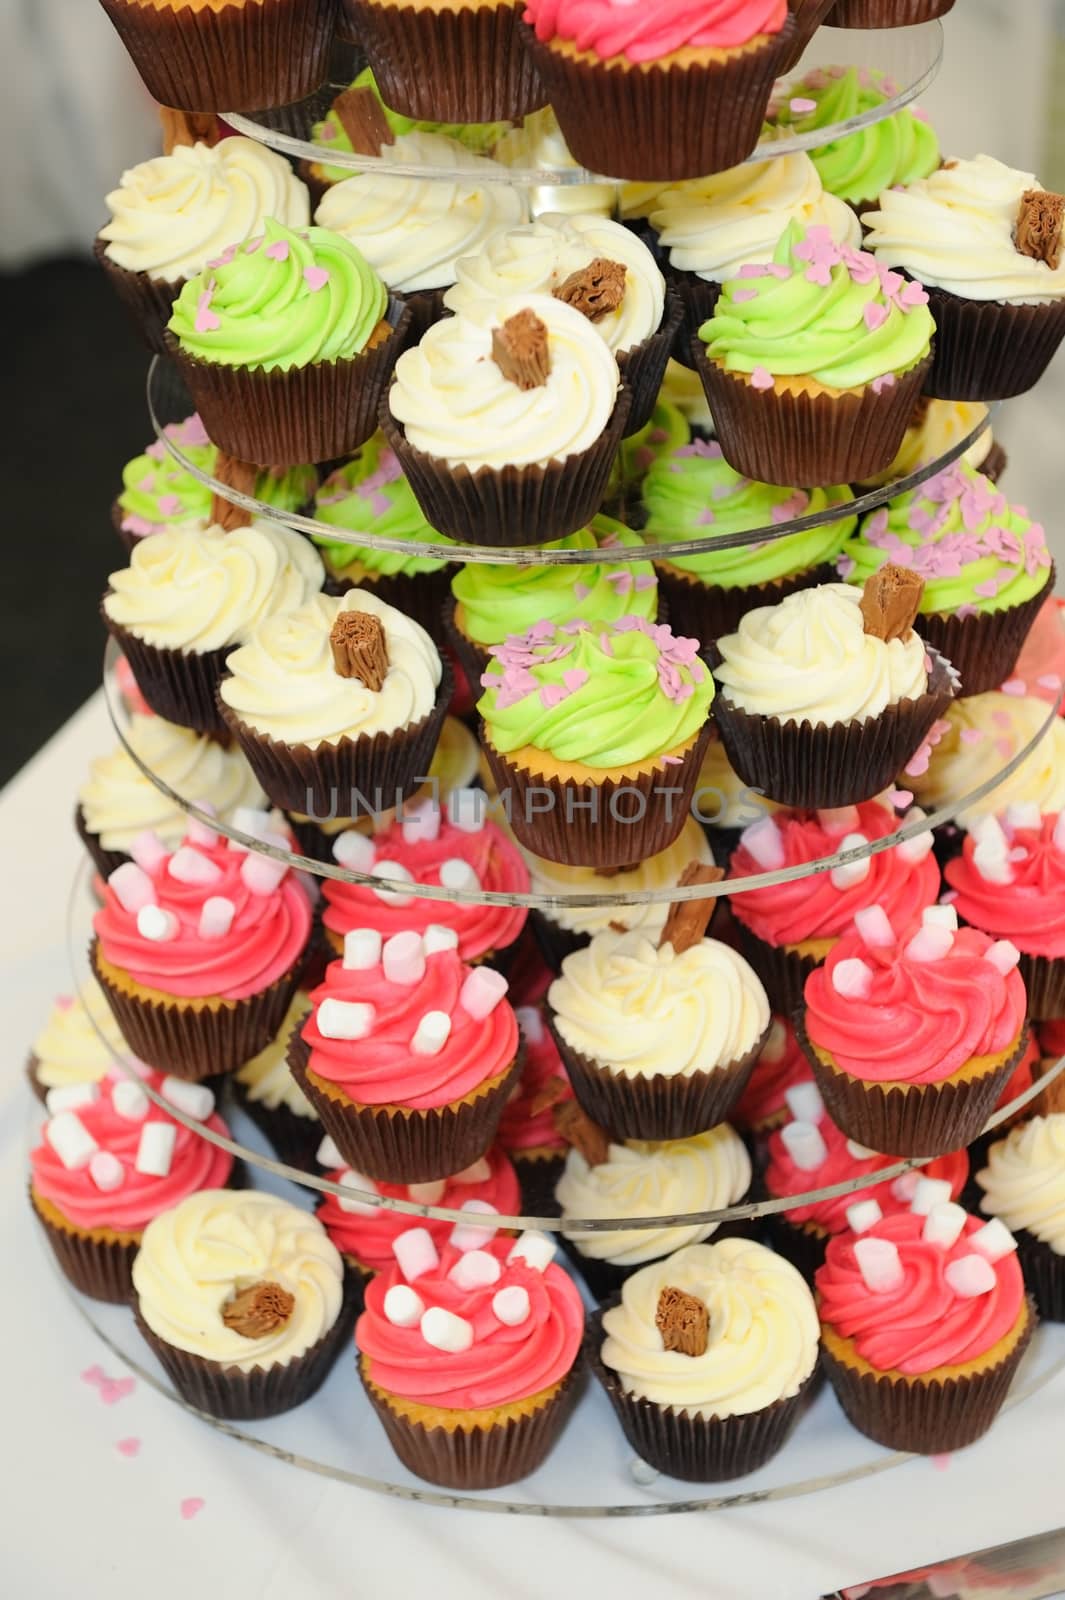 Wedding cup cakes look colorful at reception